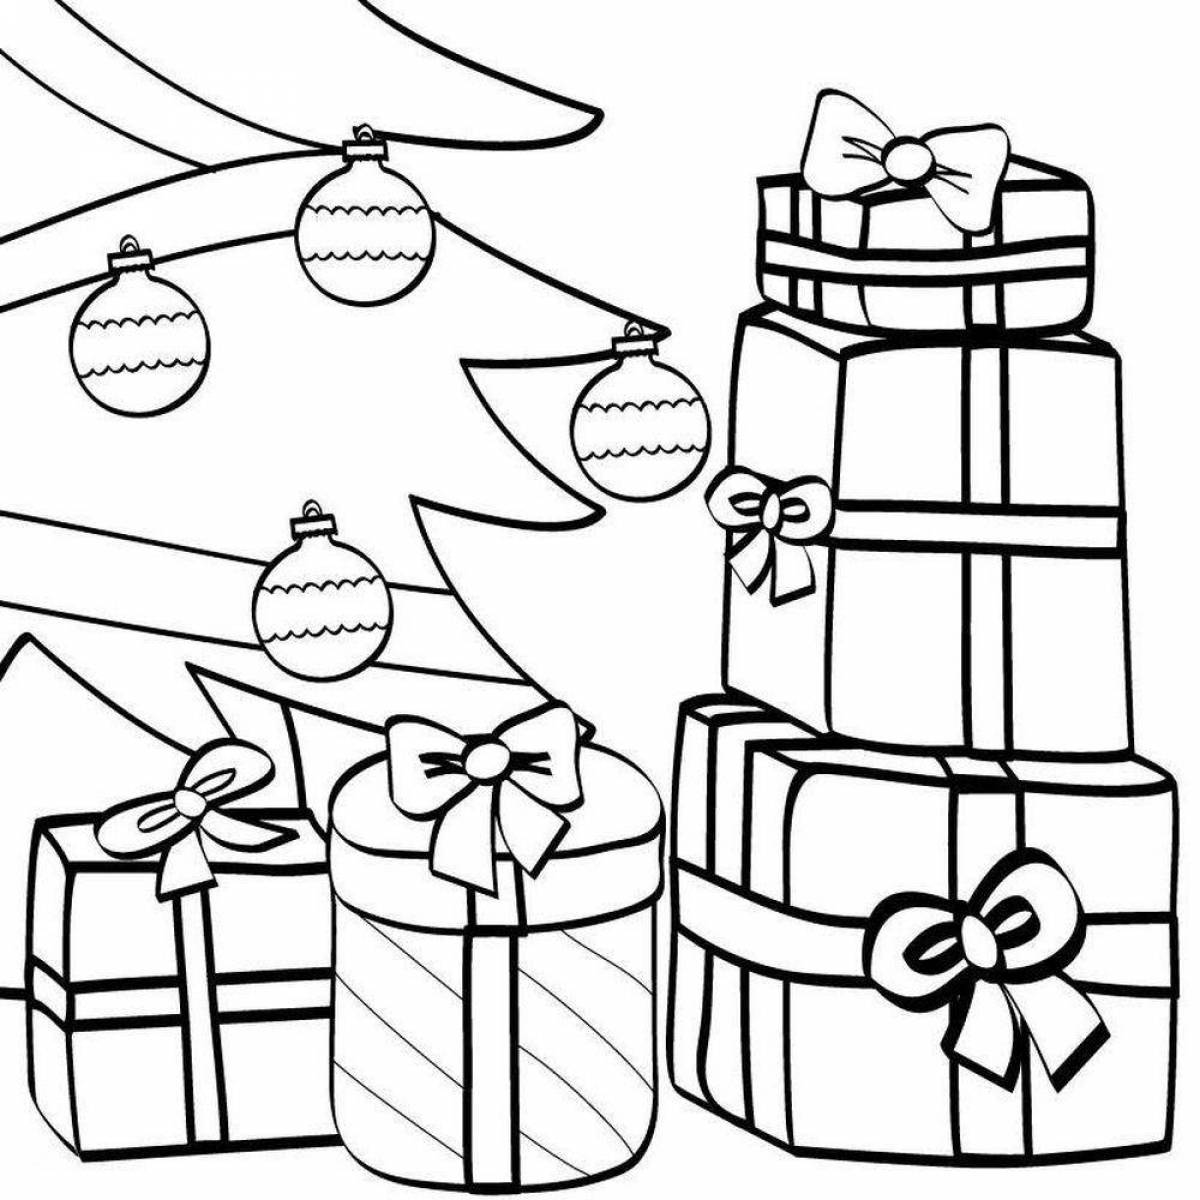 Fun coloring tree with gifts